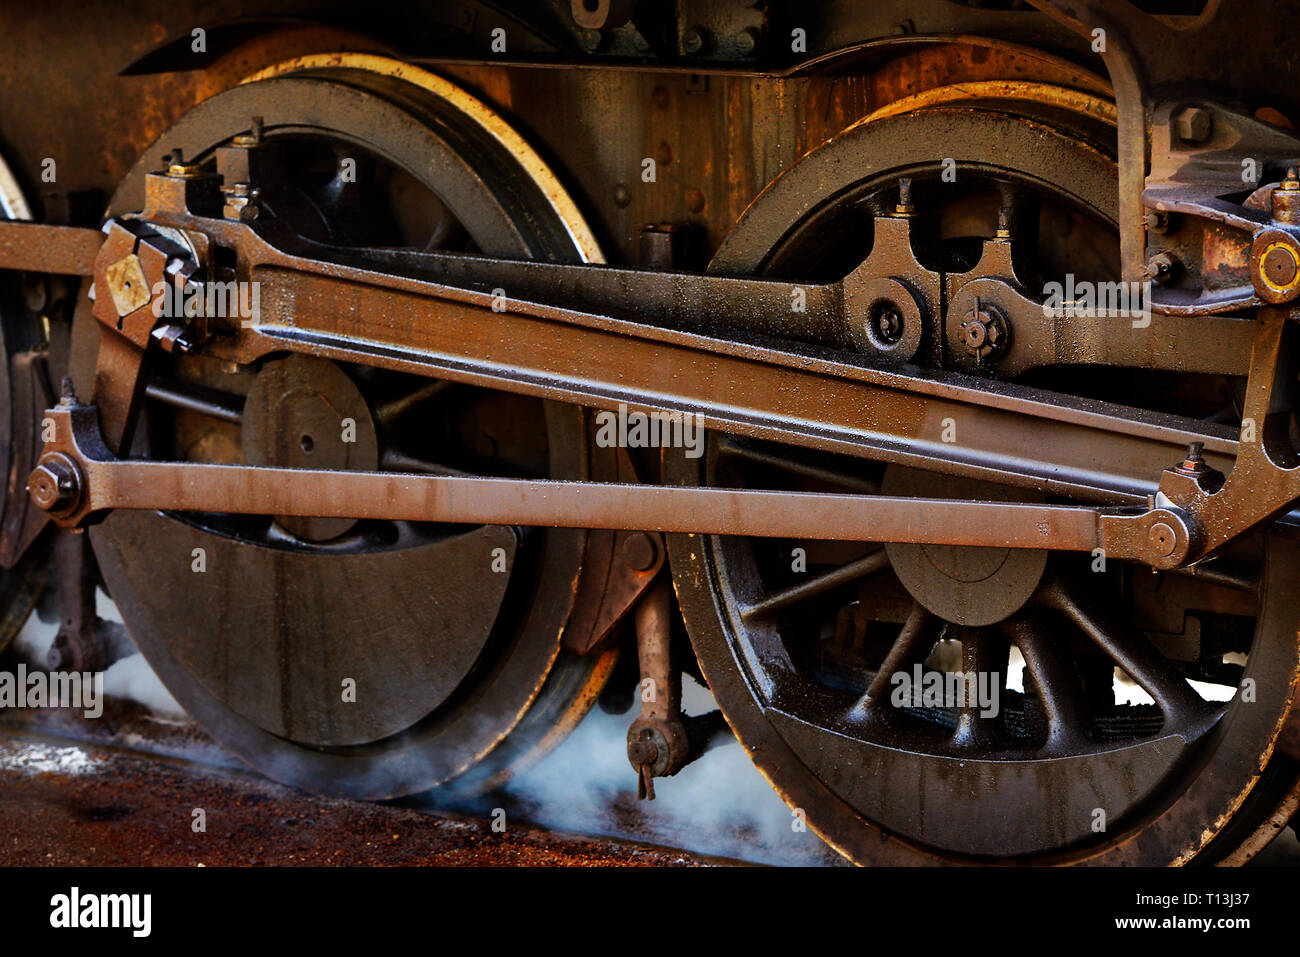 Close up of a restored steam locomotives counterbalanced main driving wheels, with steam issuing. Western Australia. Stock Photo